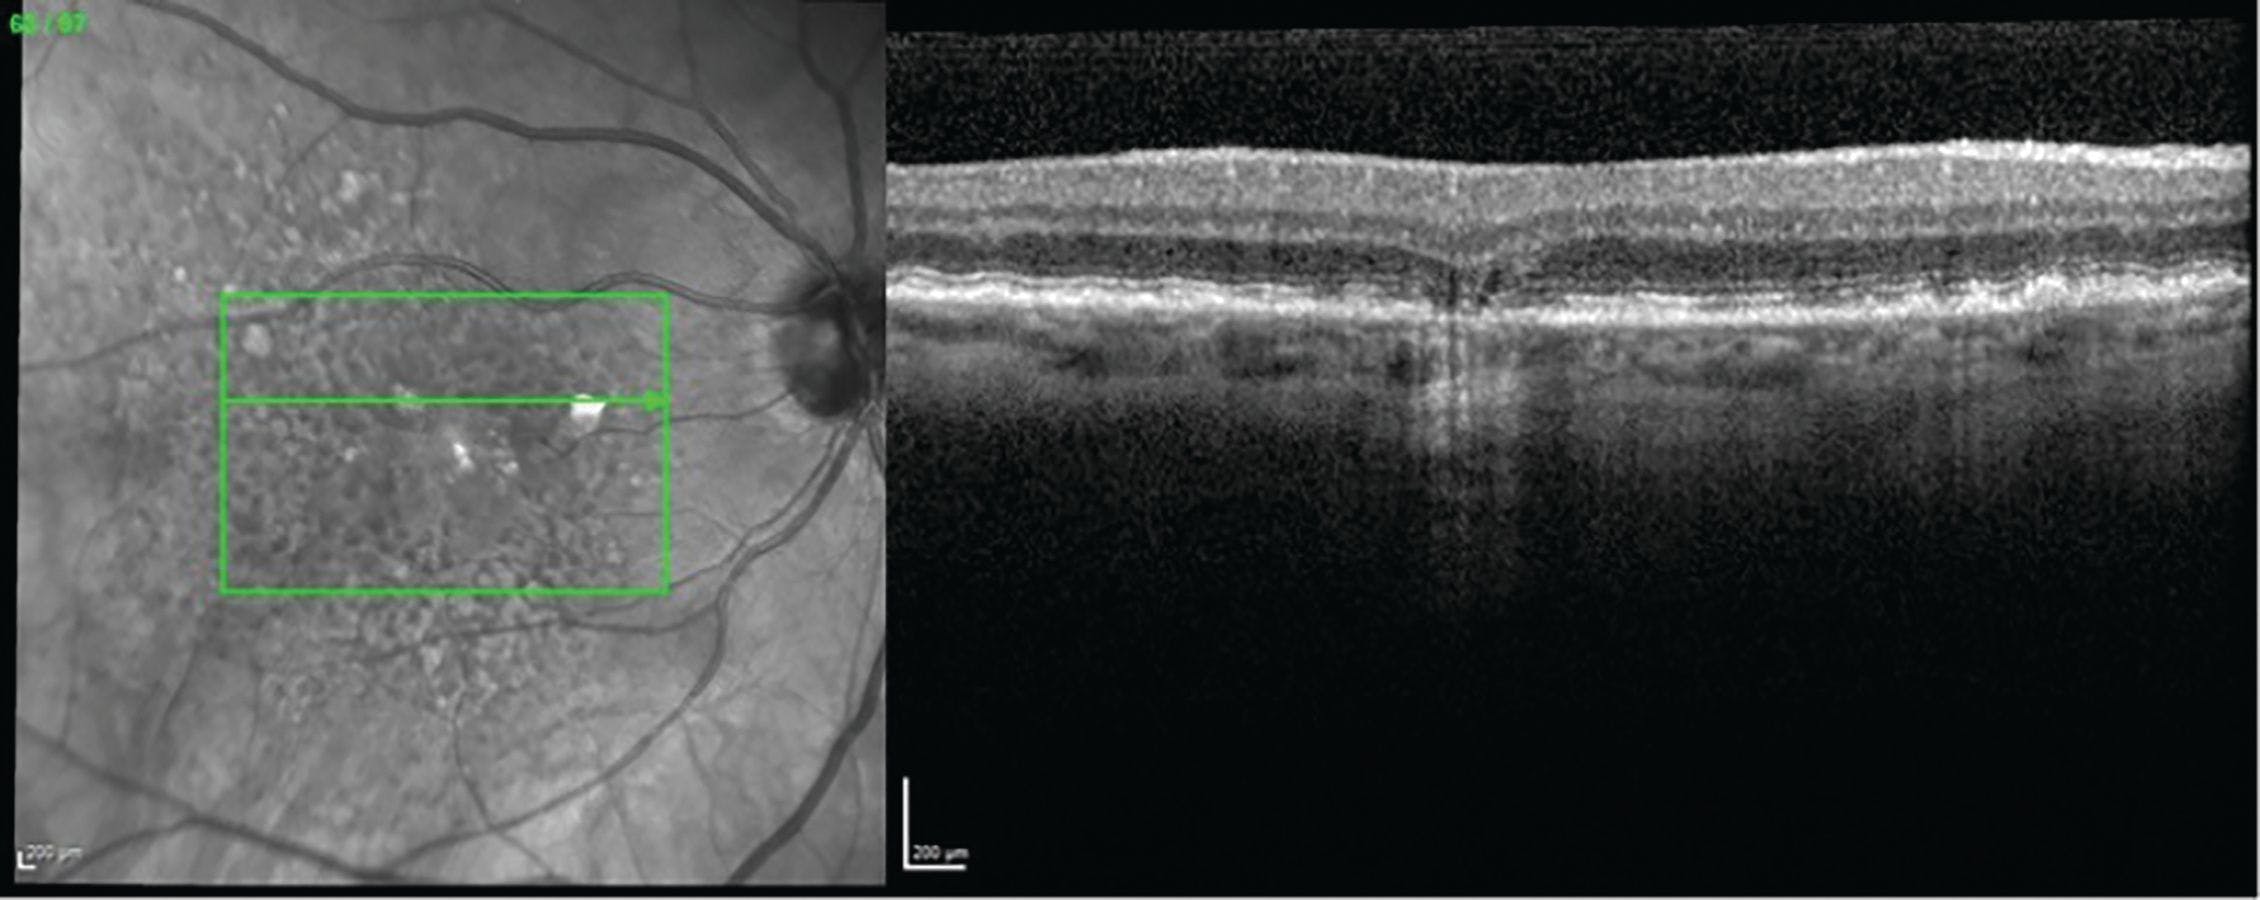 High-resolution multimodal imaging is key in dry AMD therapeutic development, future management